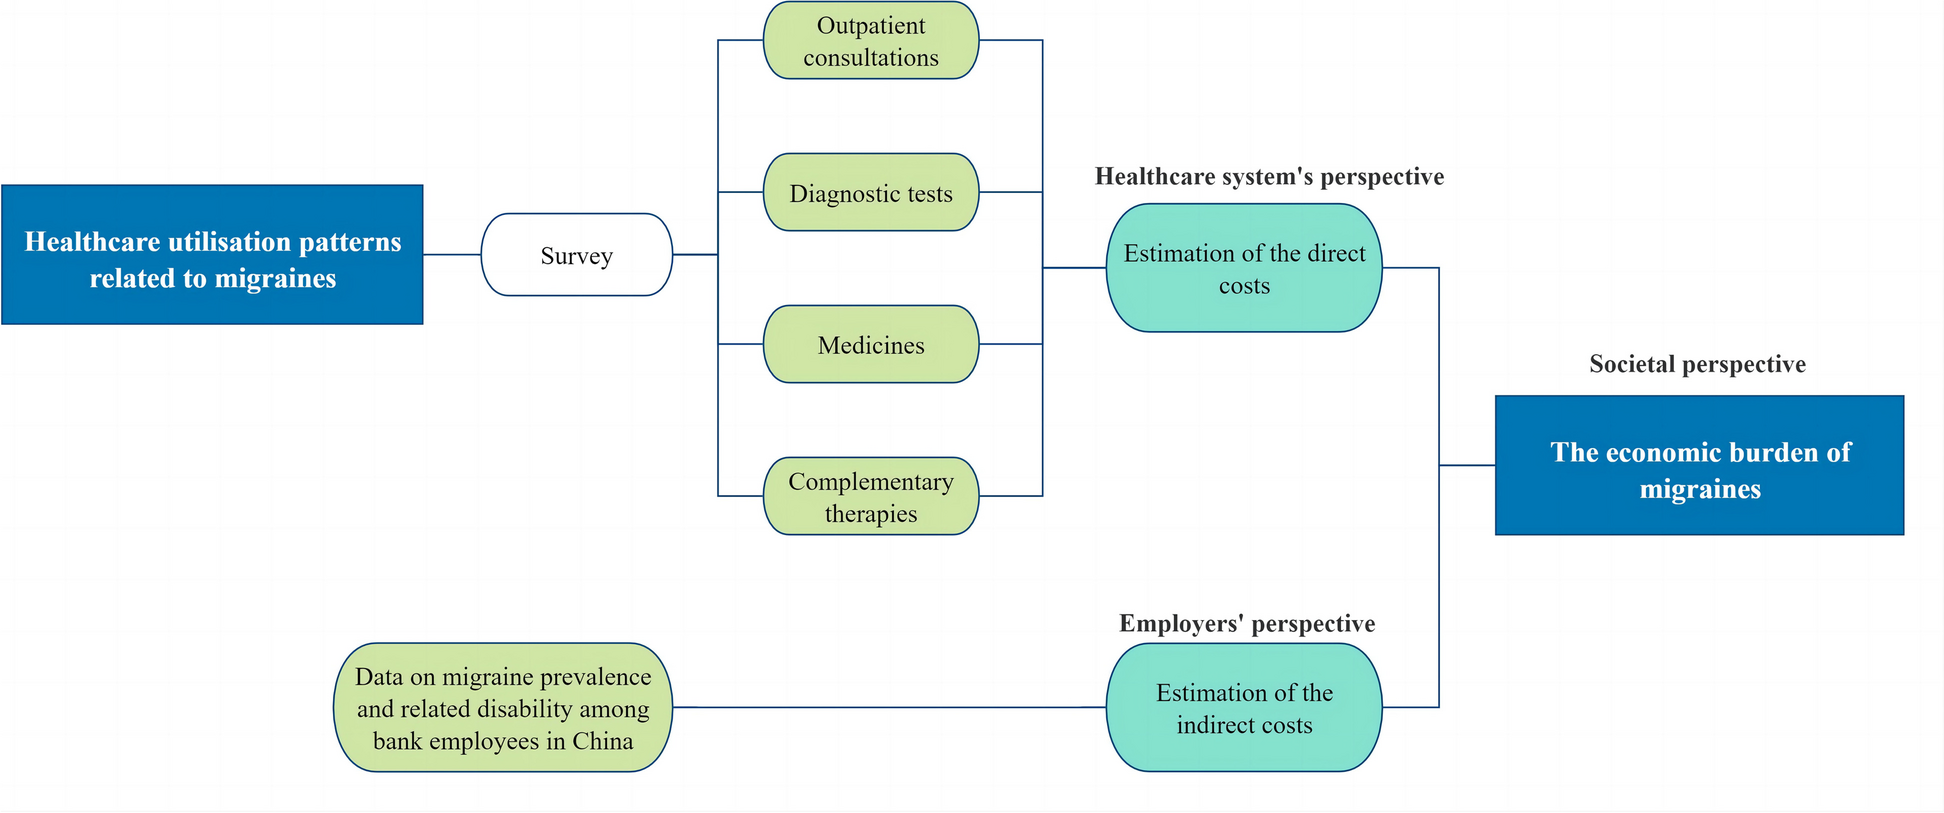 Healthcare utilisation and economic burden of migraines among bank employees in China: a probabilistic modelling study